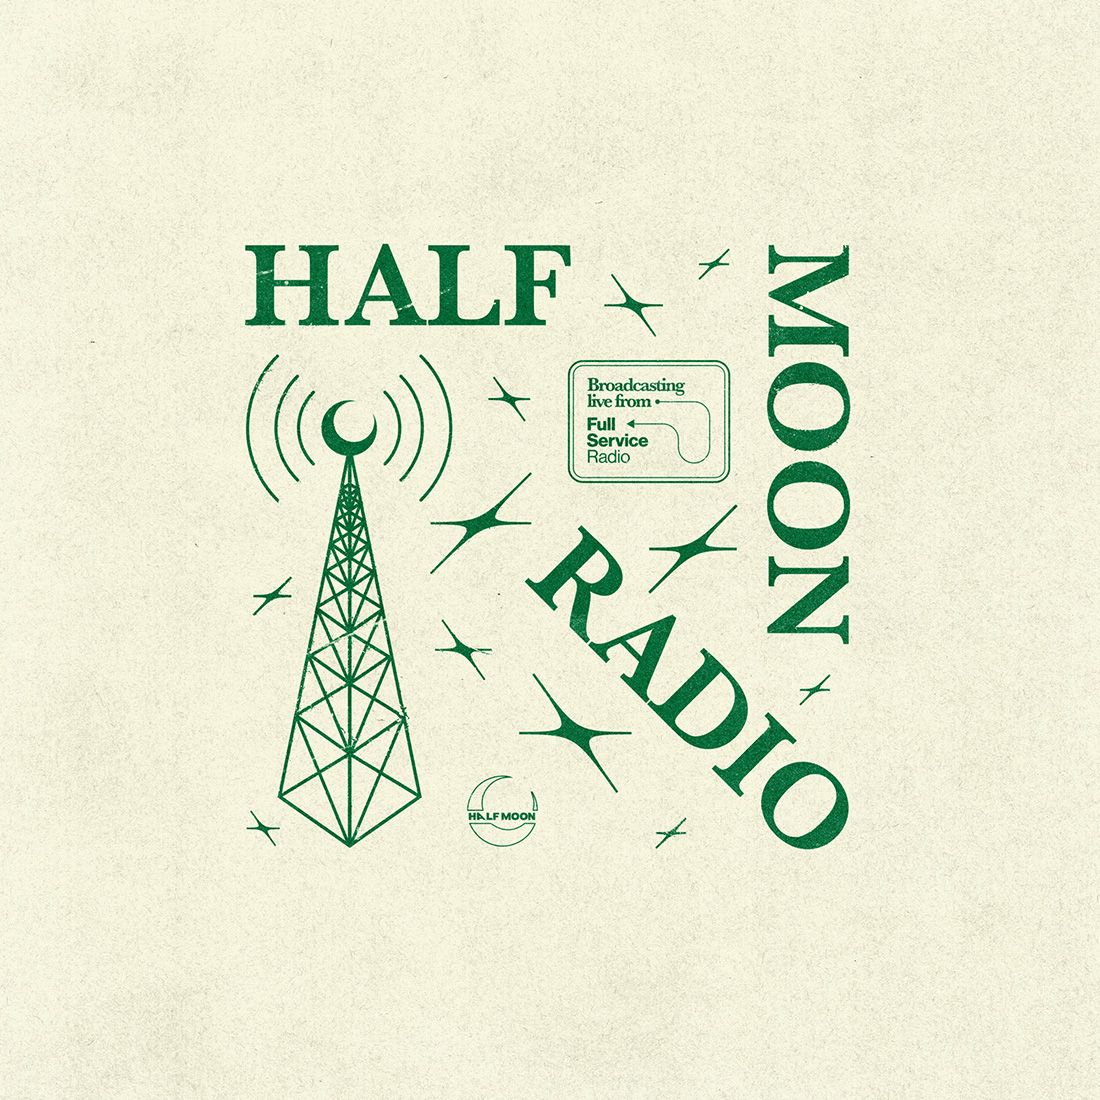 A poster to Half Moon at Full Service Radio